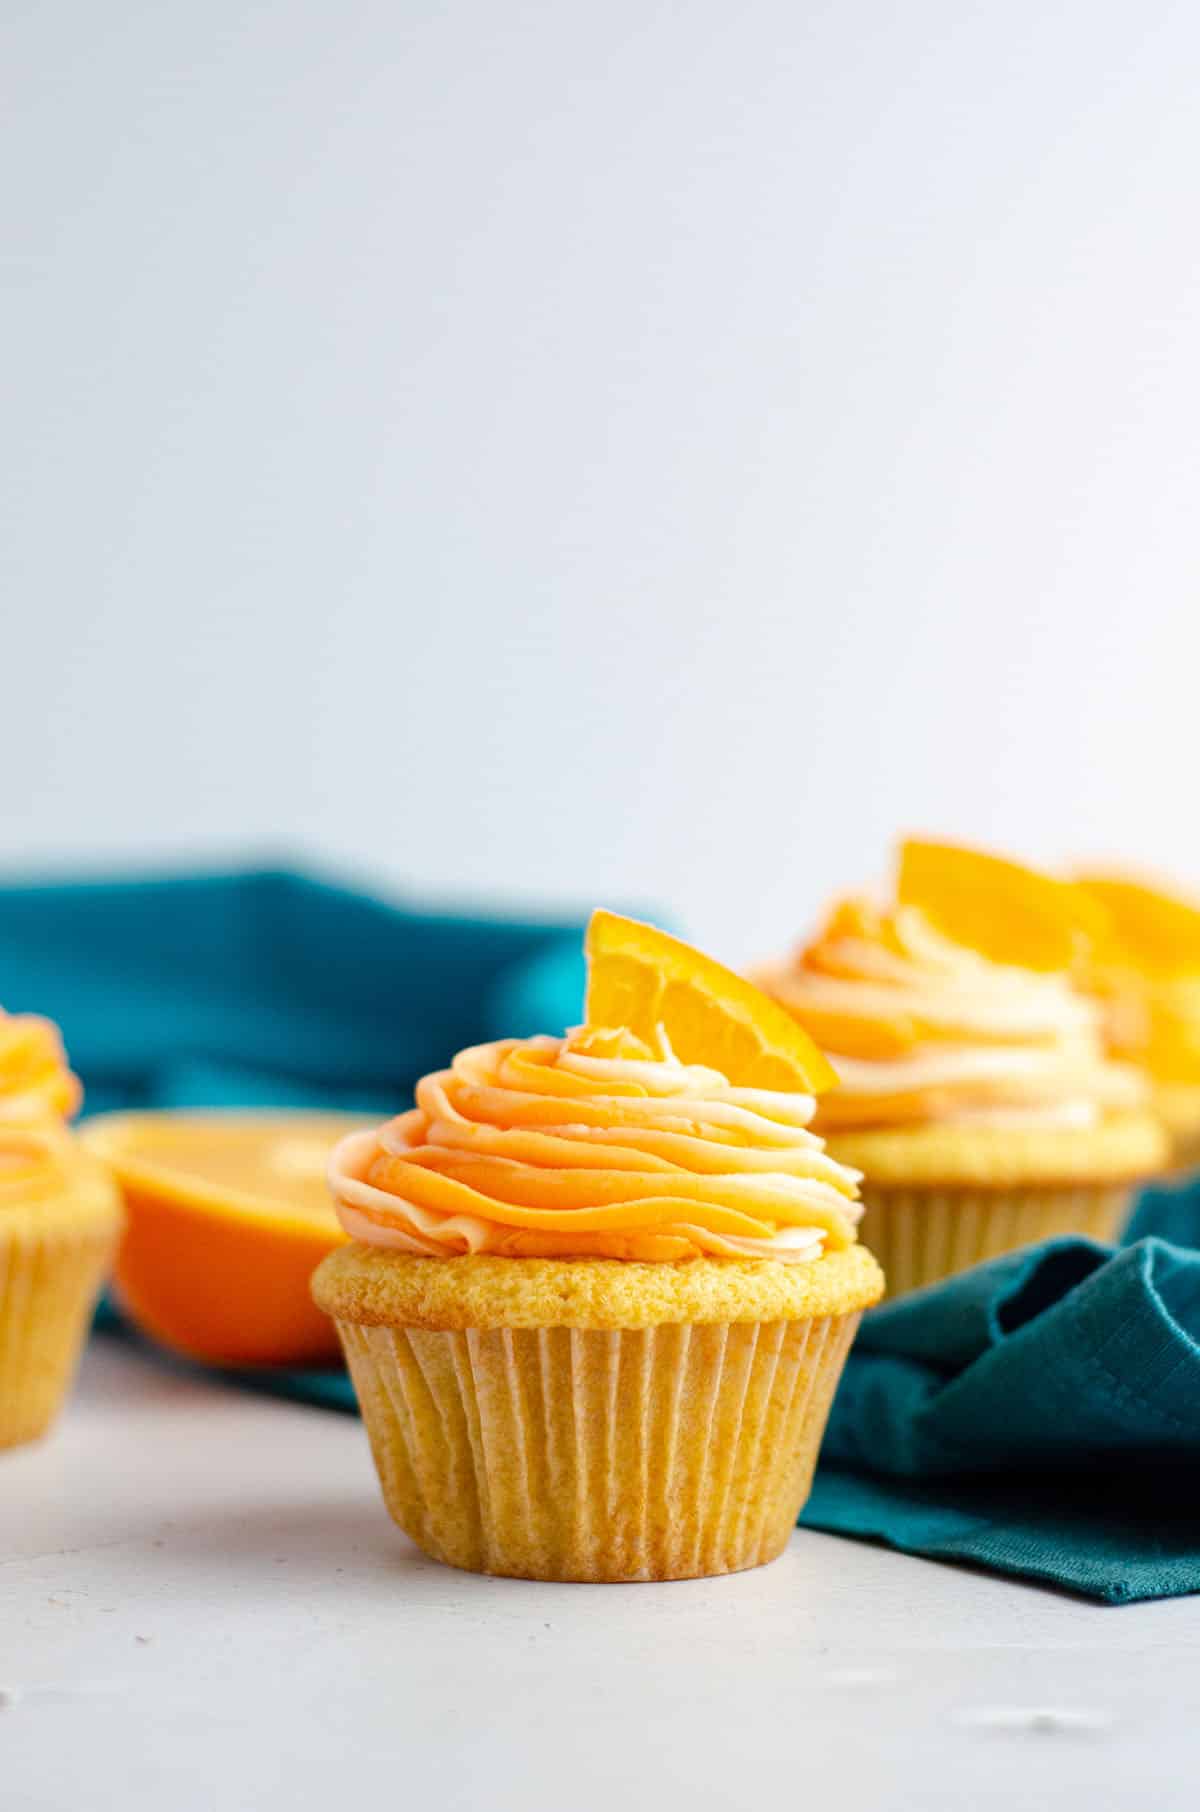 orange creamsicle cupcake in front of a turquoise kitchen towel and orange slices